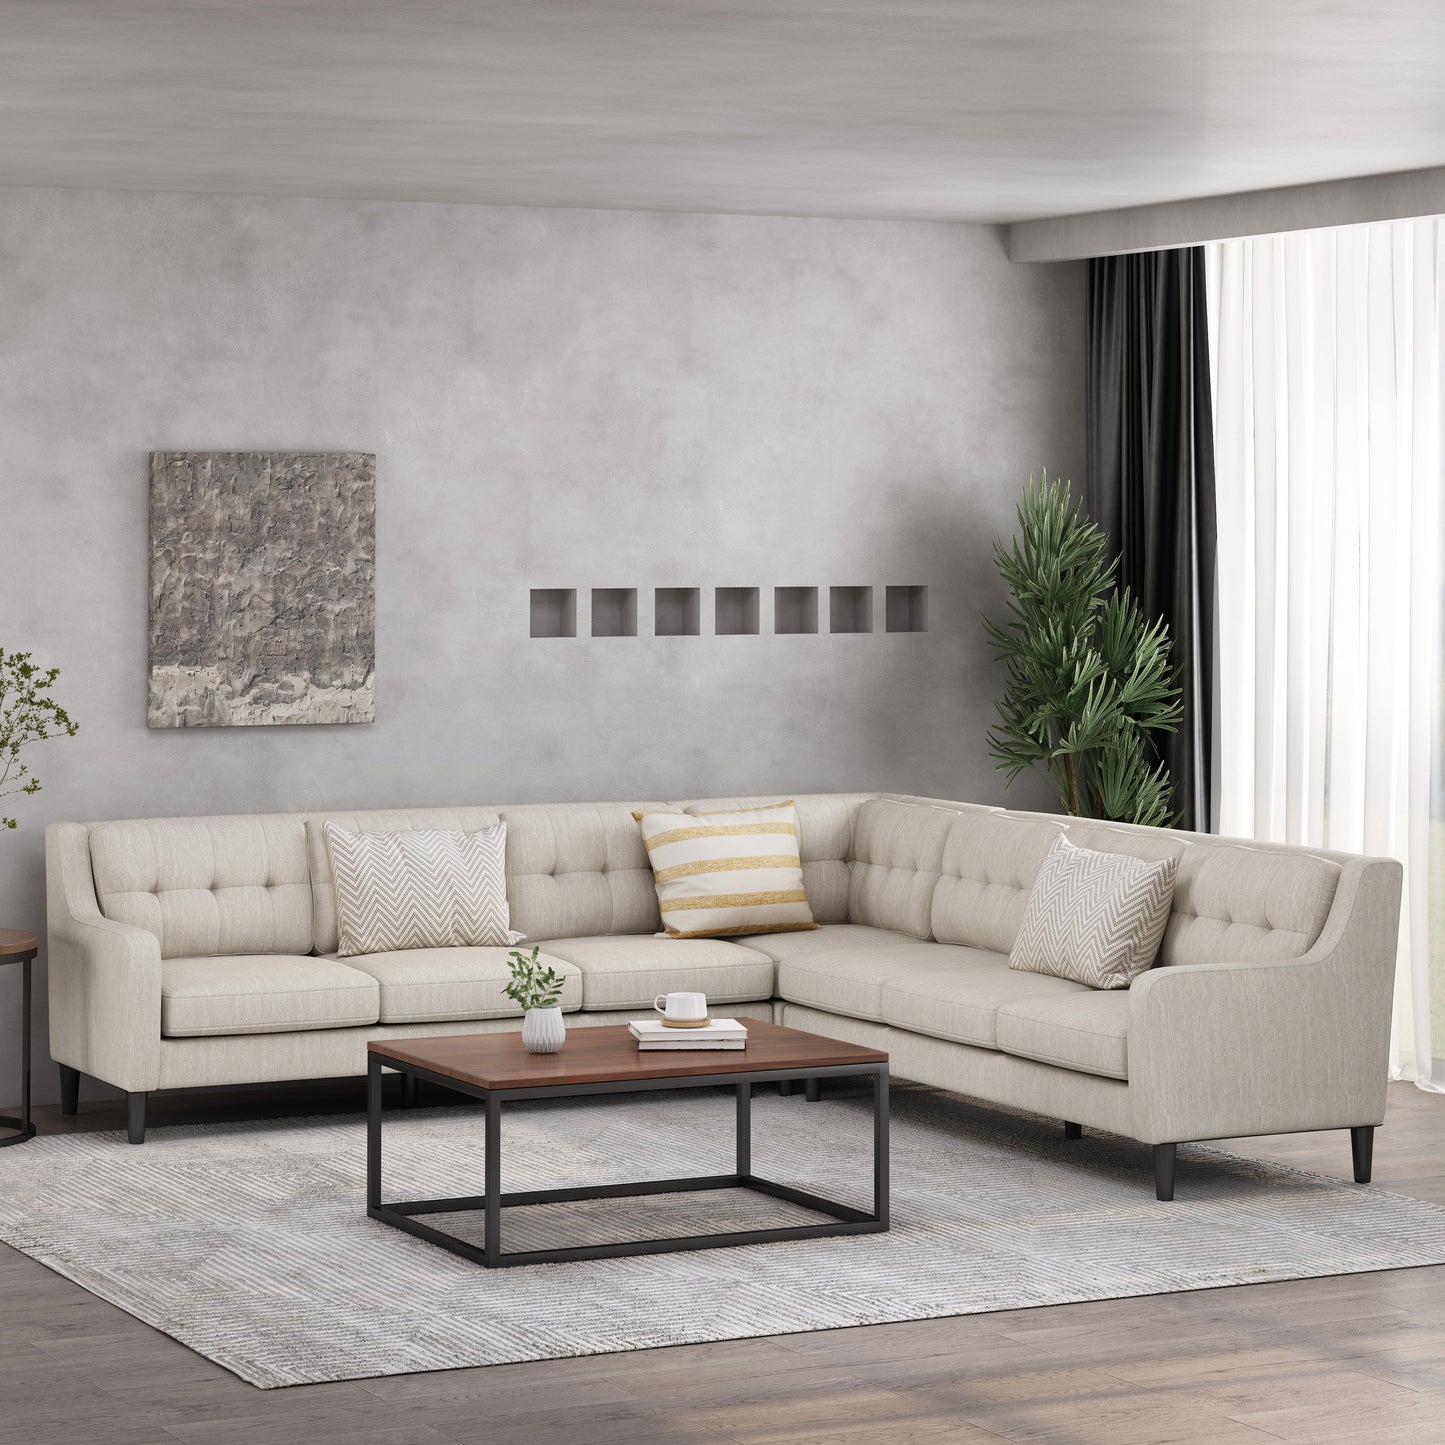 McCone Contemporary Tufted Fabric 7 Seater Sectional Sofa Set